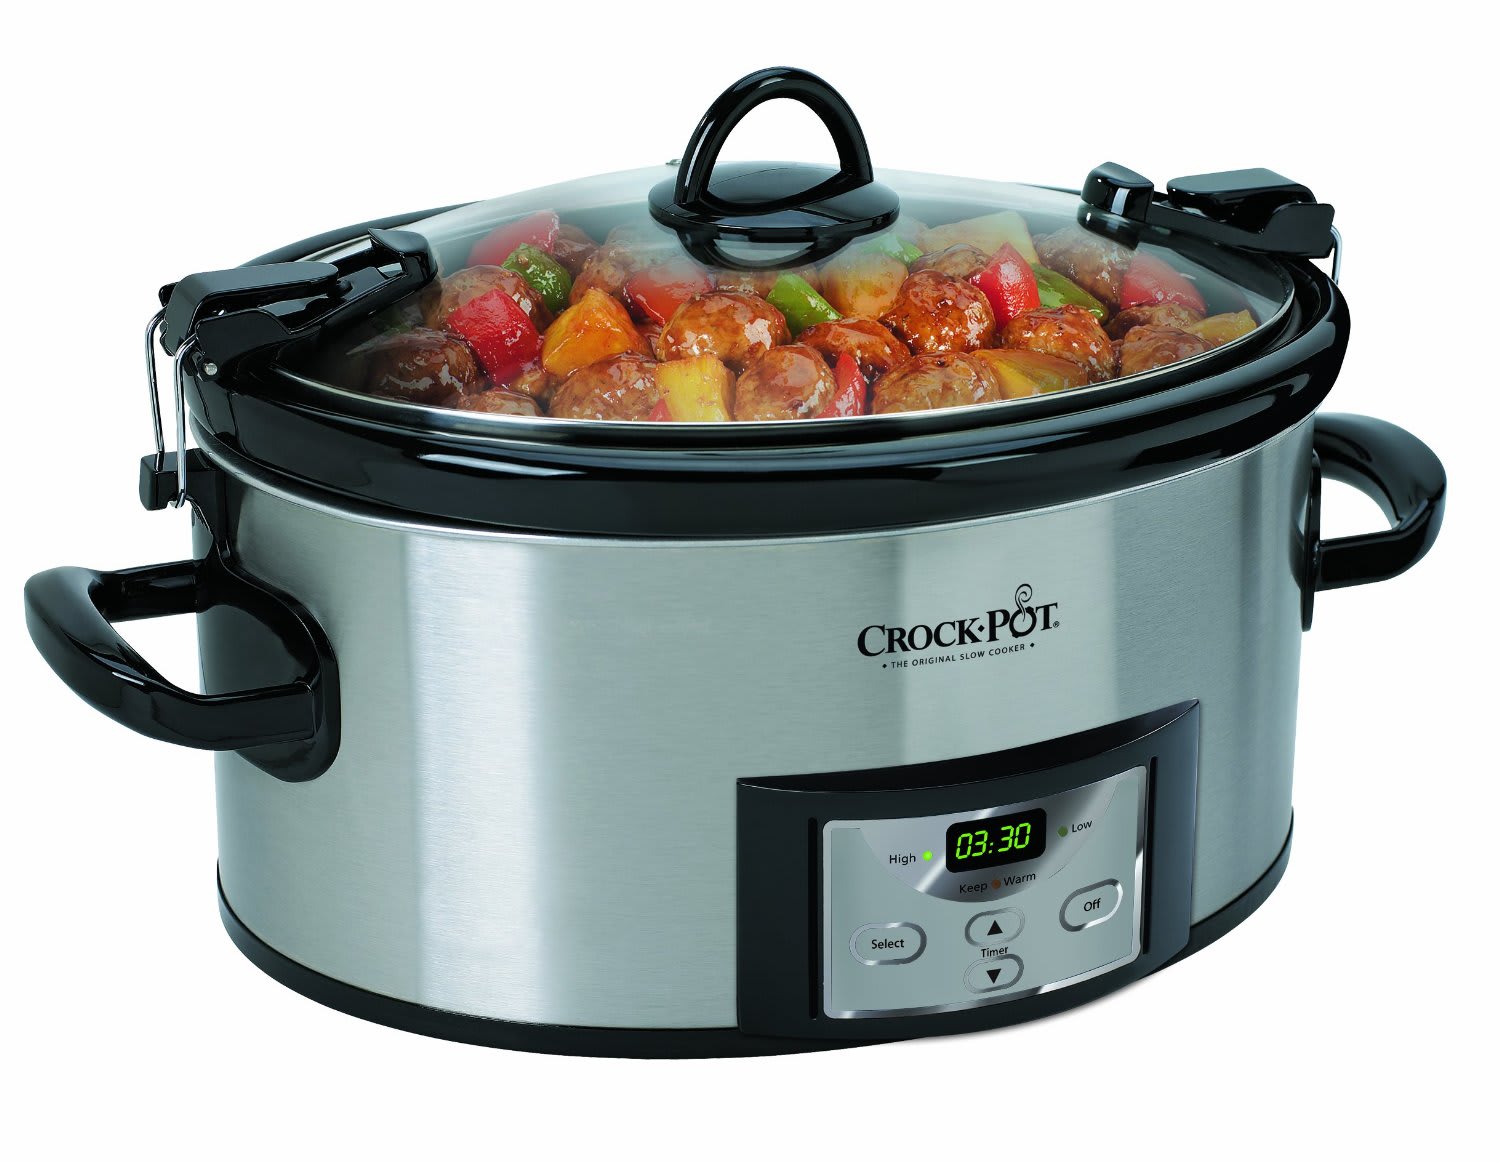 The 7 best Crock-Pots and slow cookers to buy in 2018